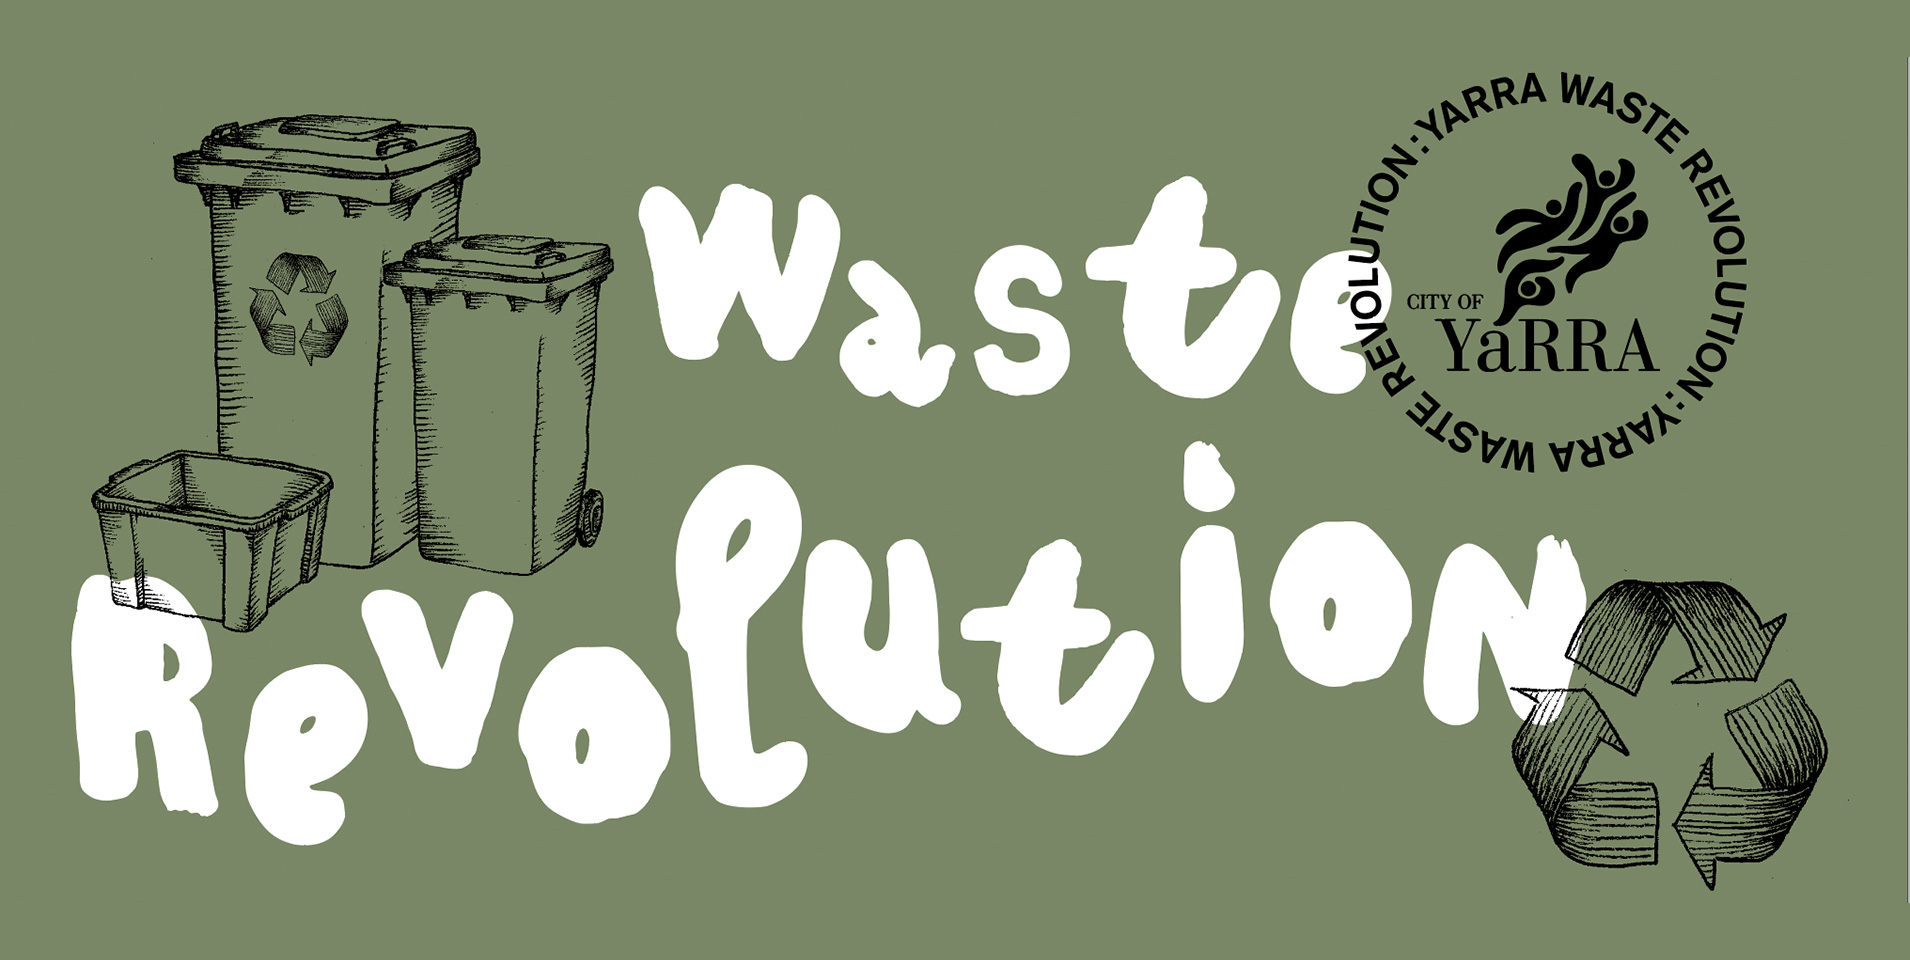 Engaging communities to see waste differently.